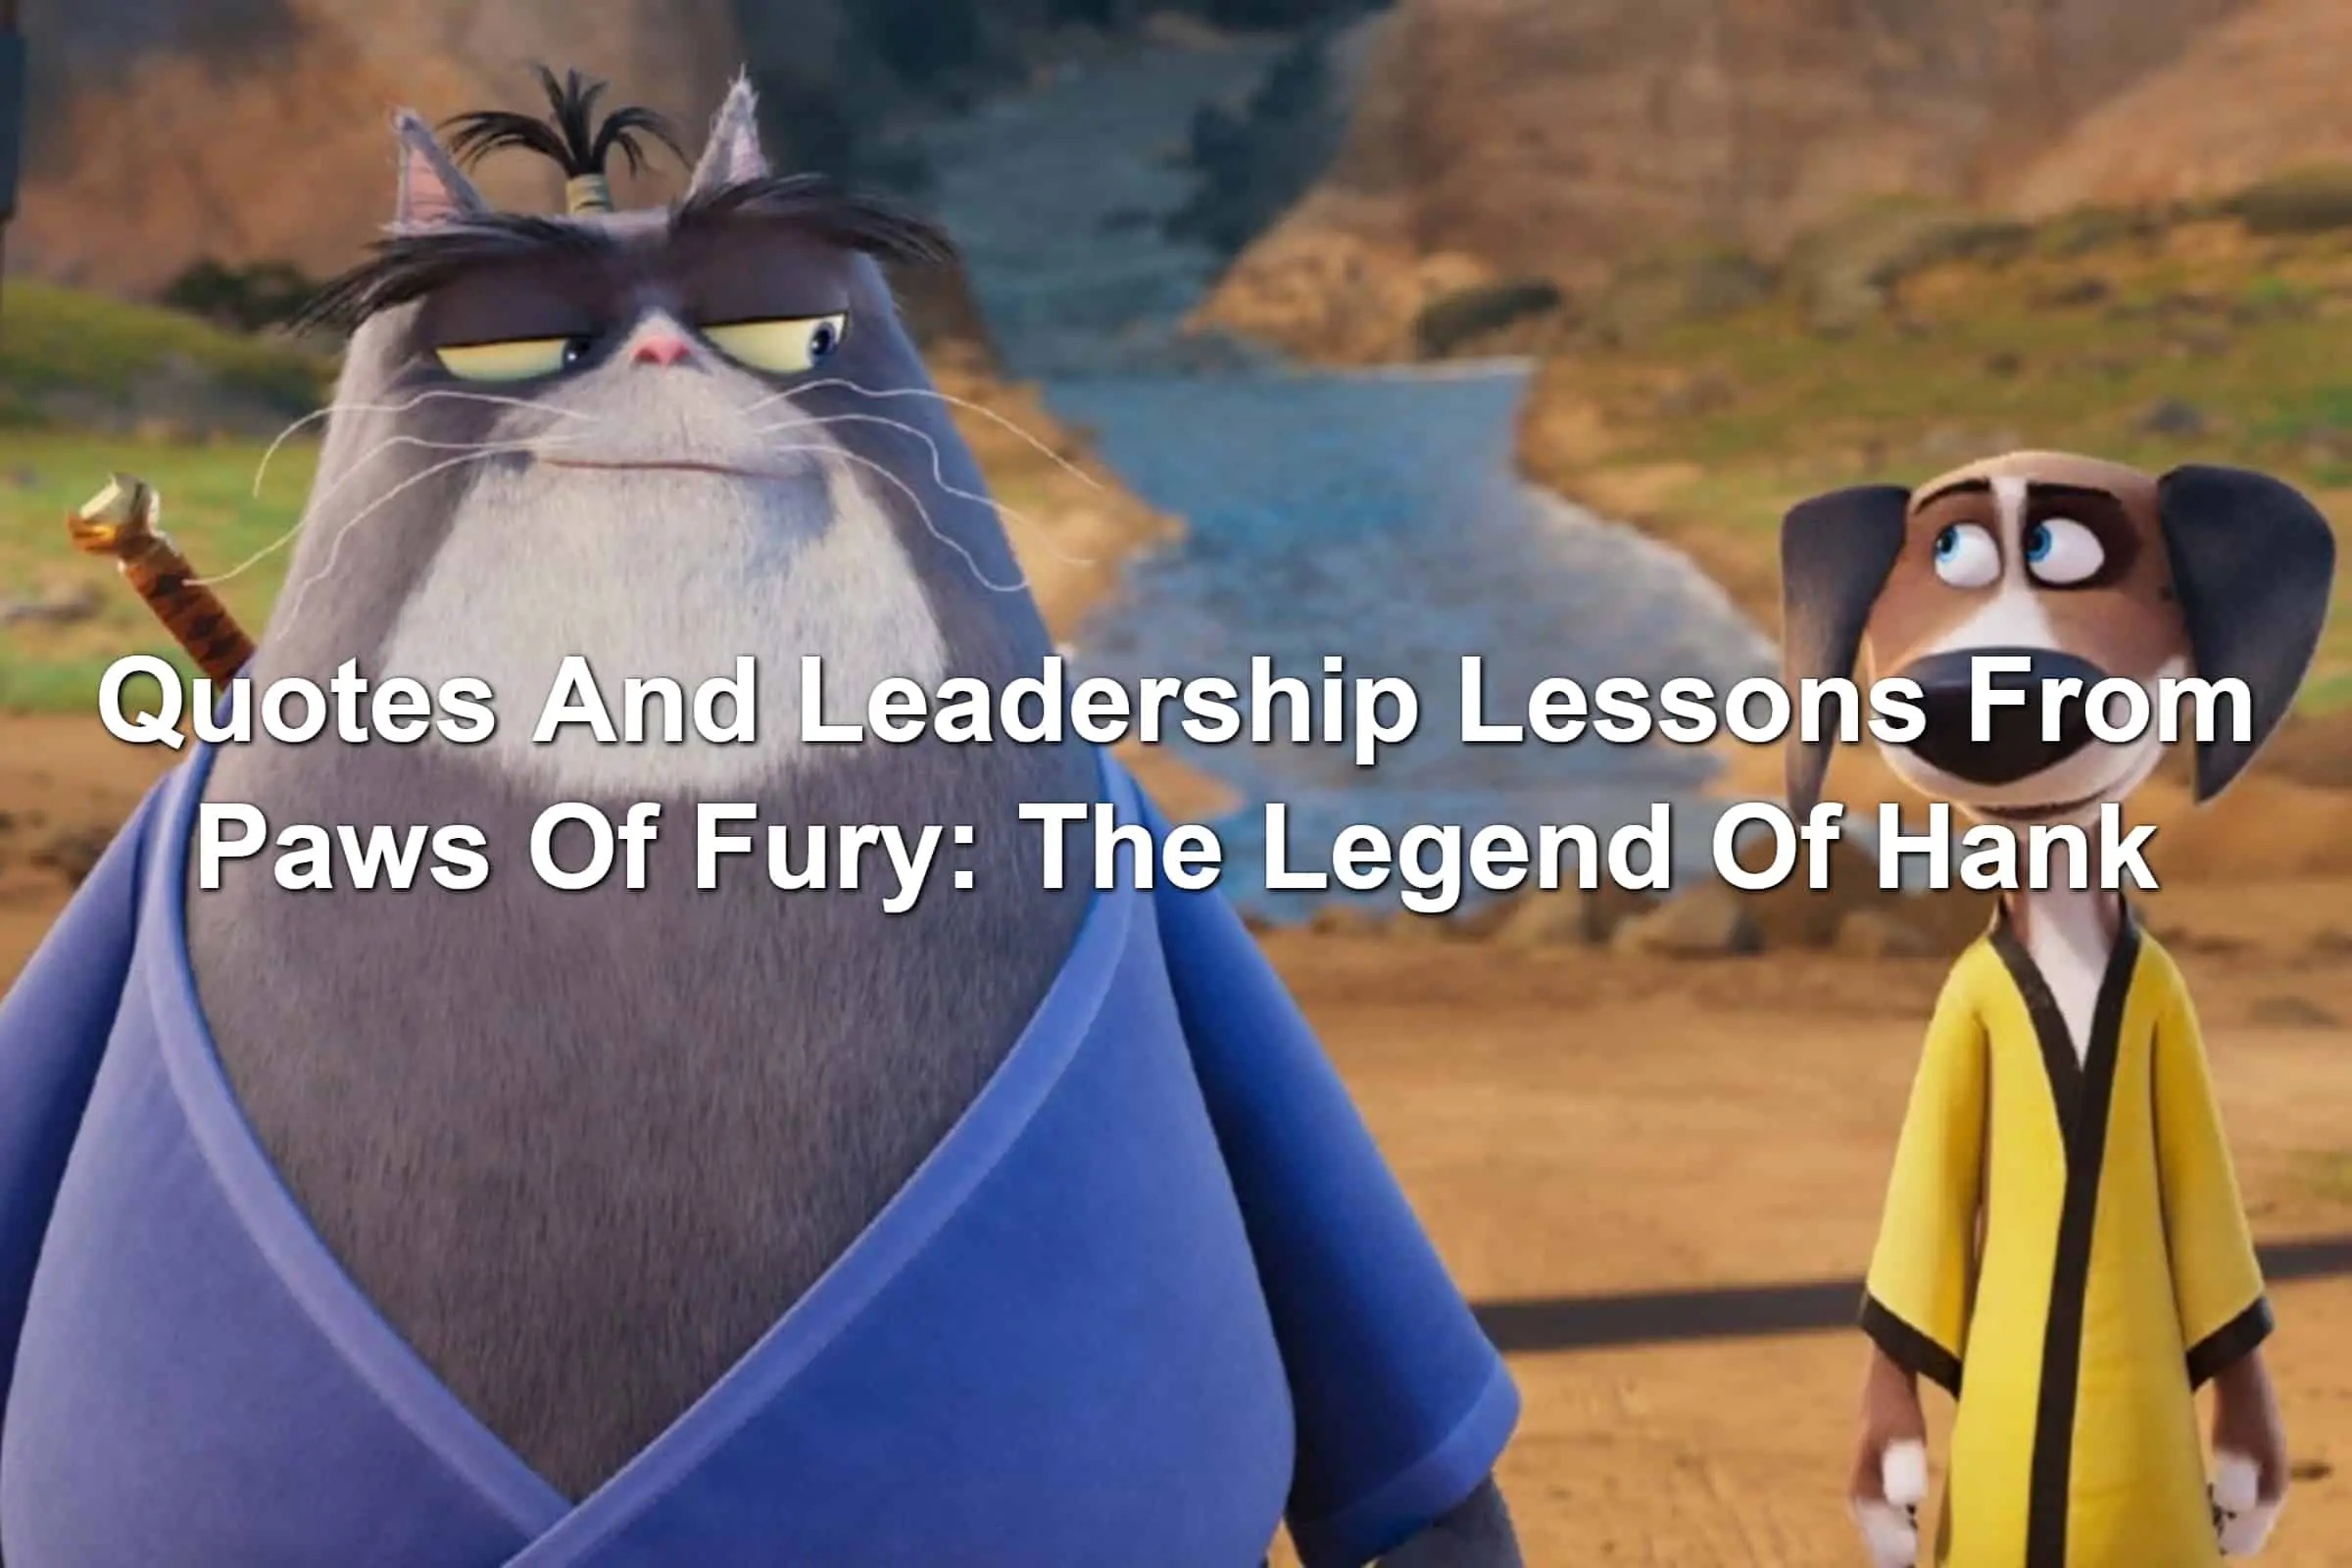 Quotes And Leadership Lessons From Paws Of Fury: The Legend Of Hank